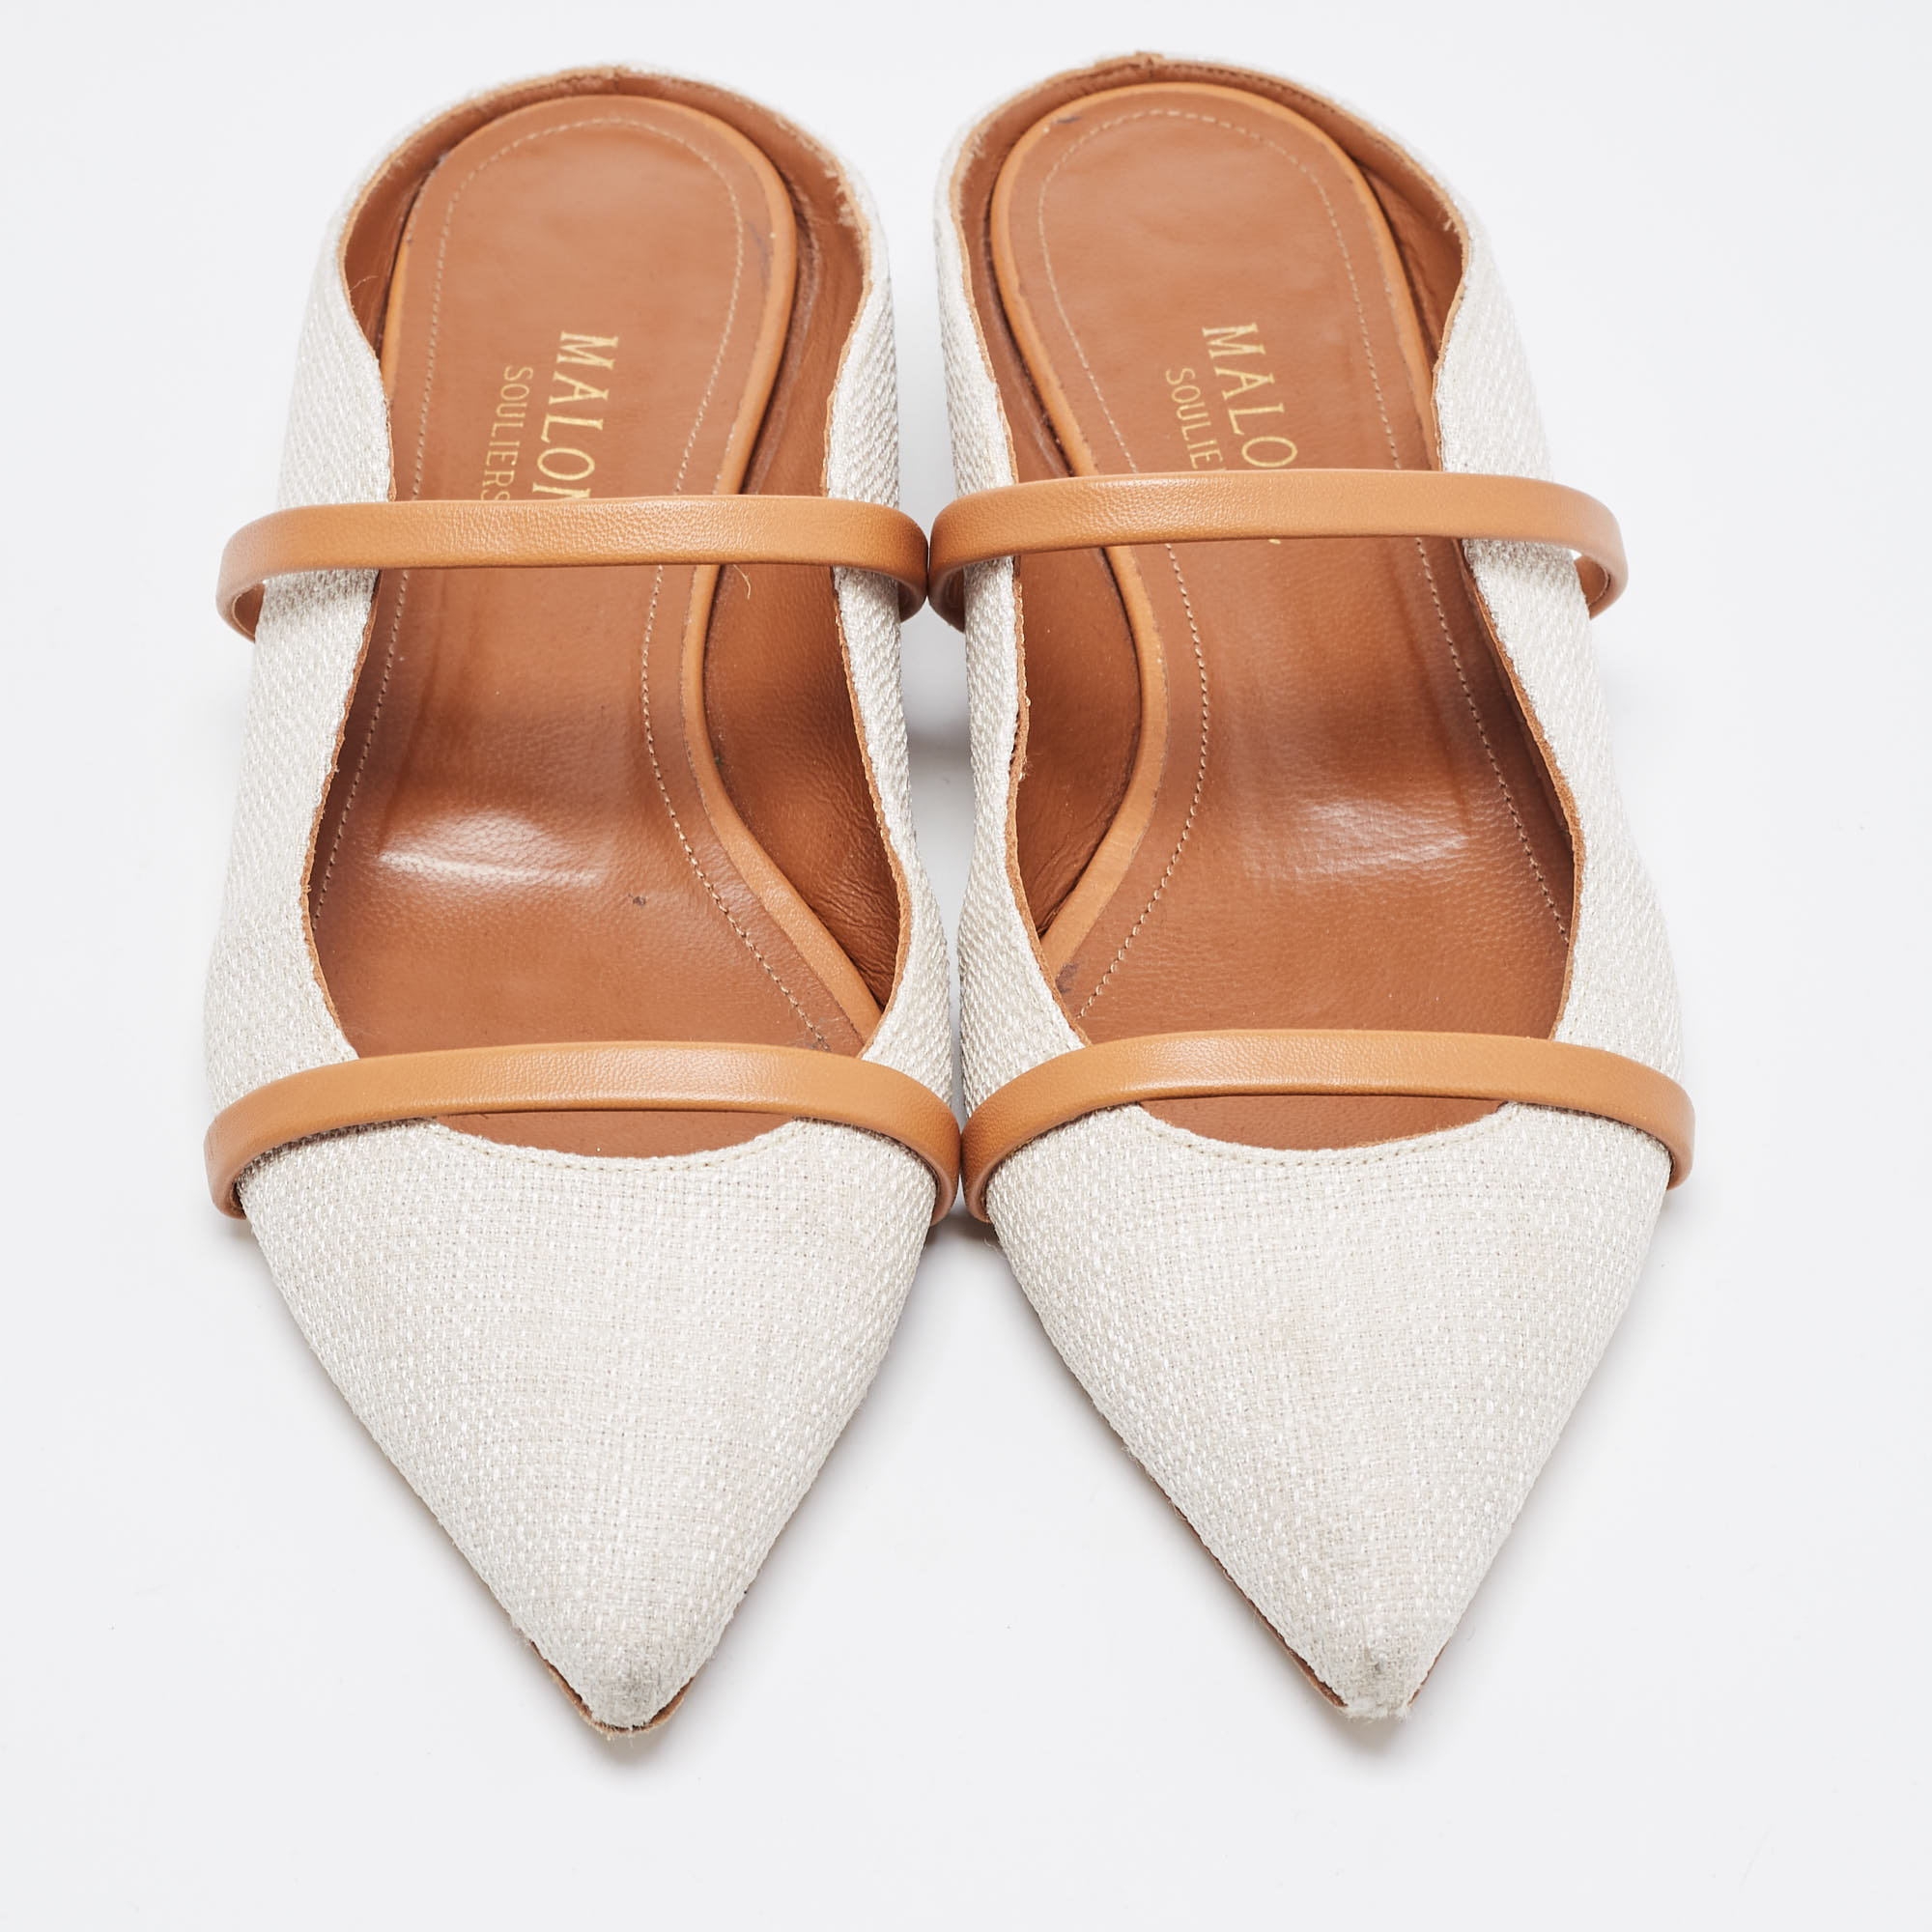 Malone Souliers White/Tan Canvas And Leather Maureen Flat Mules Size 36